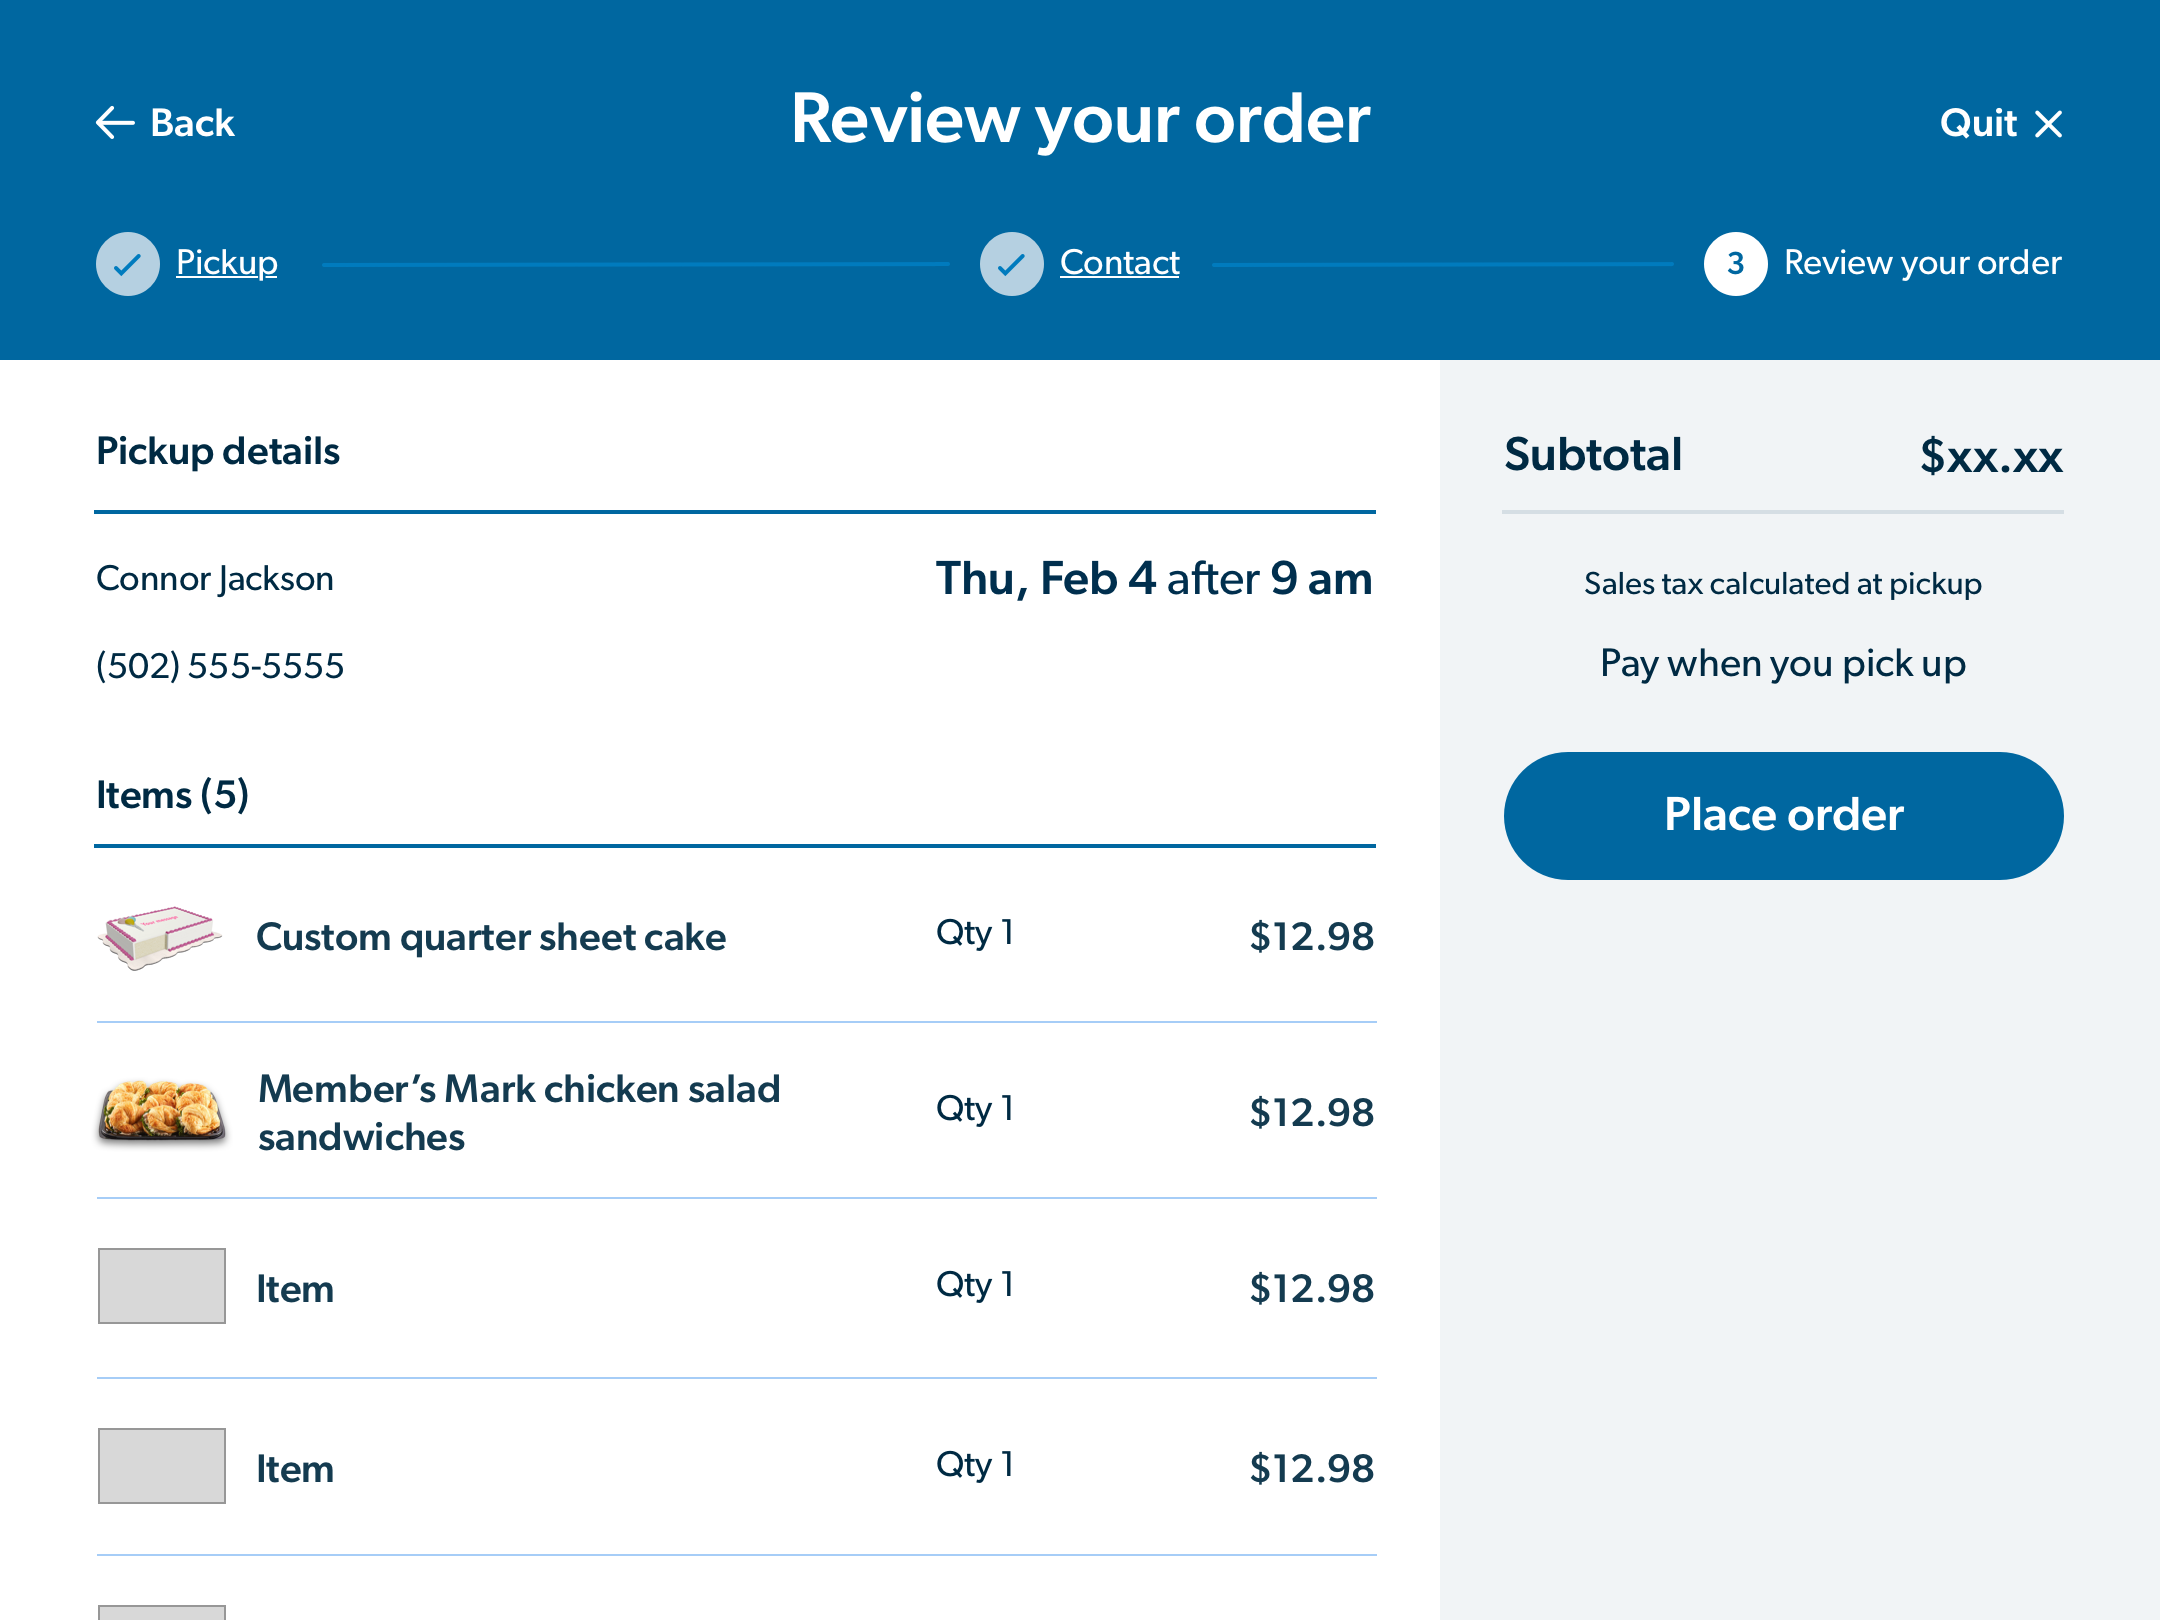 Review your order. Place your order when you're ready. You'll pay when you pick it up.